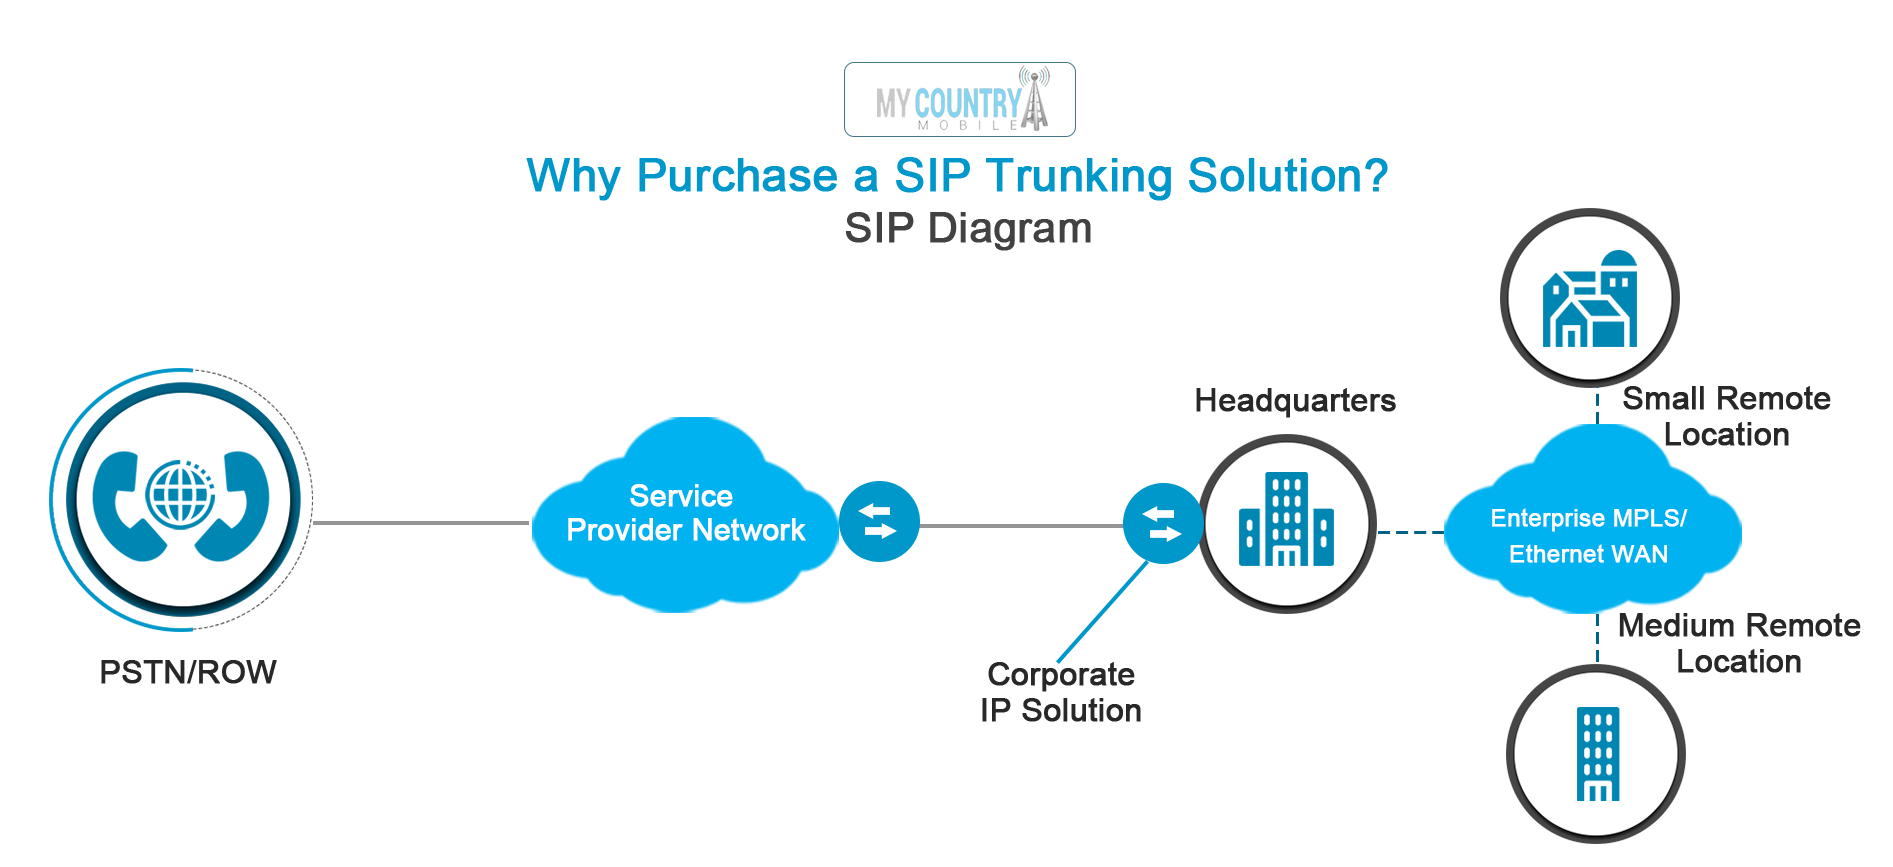 7-ways-sip-trunking-saves-your-business-money/